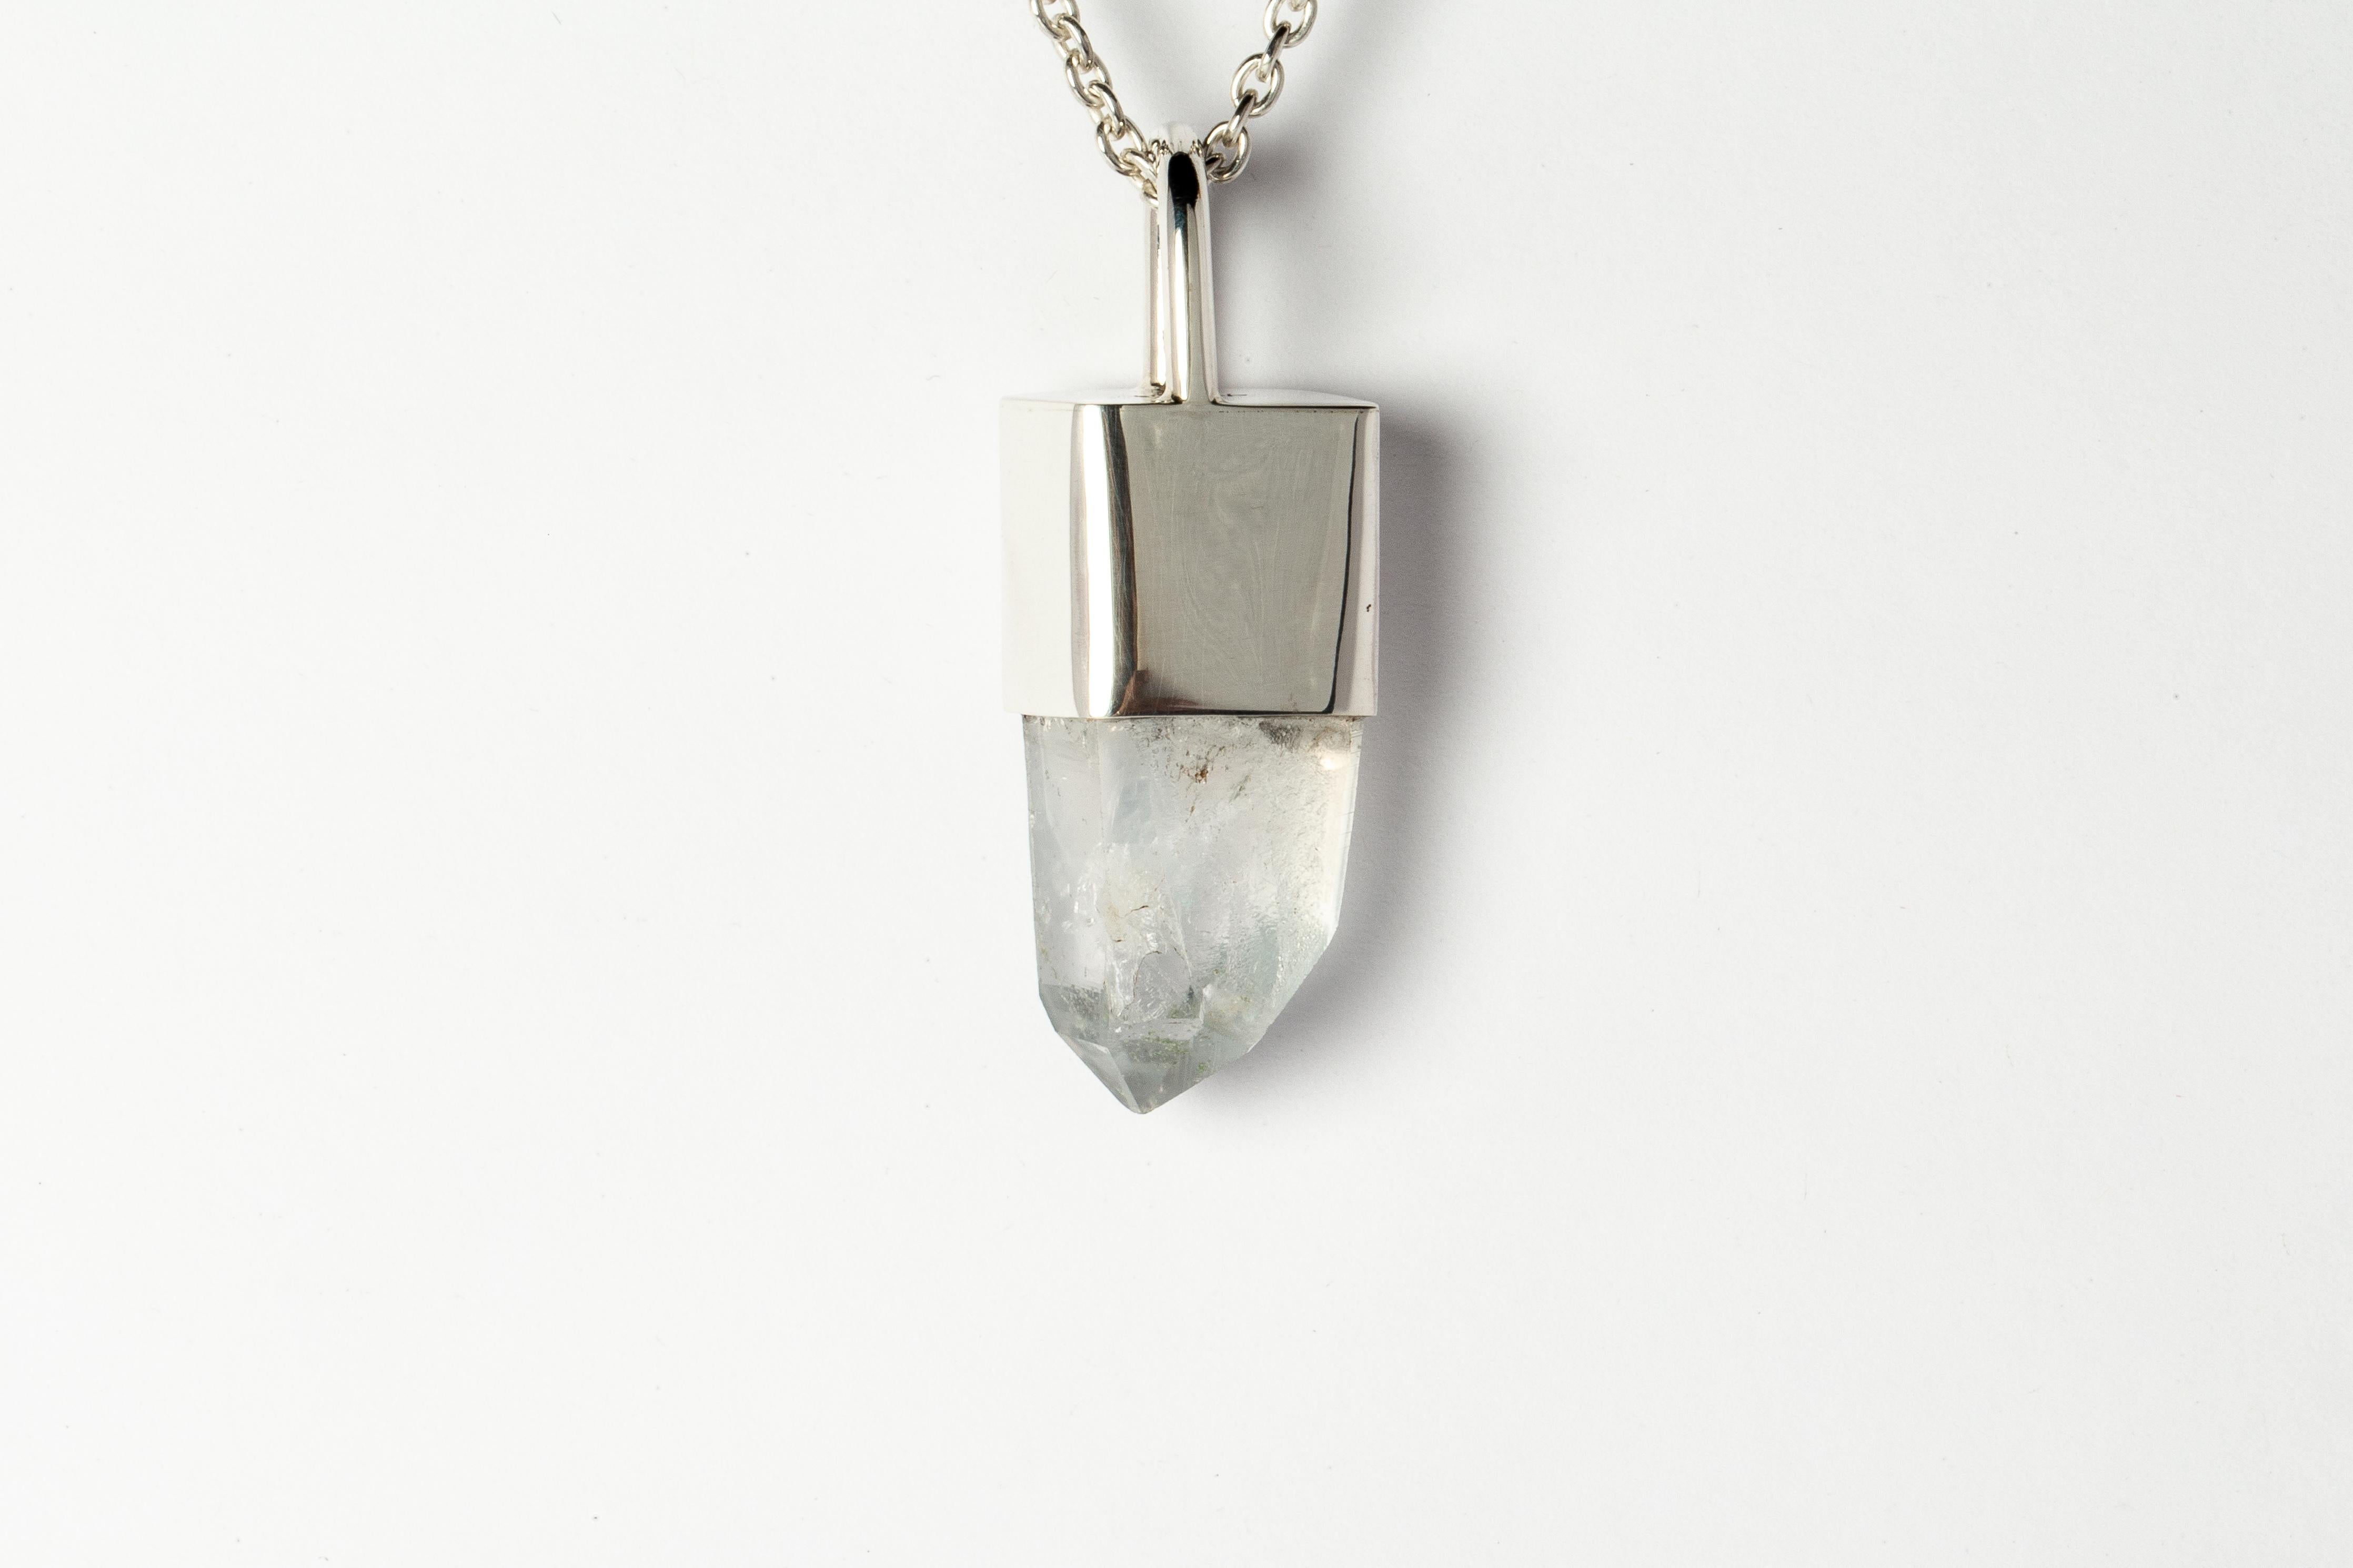 Pendant necklace in polished sterling silver and a slab of rough misc quartz. It comes on a 75 cm sterling silver.
The Talisman series is an exploration into the power of natural crystals. Tools for Magic. The crystals used in these pieces are